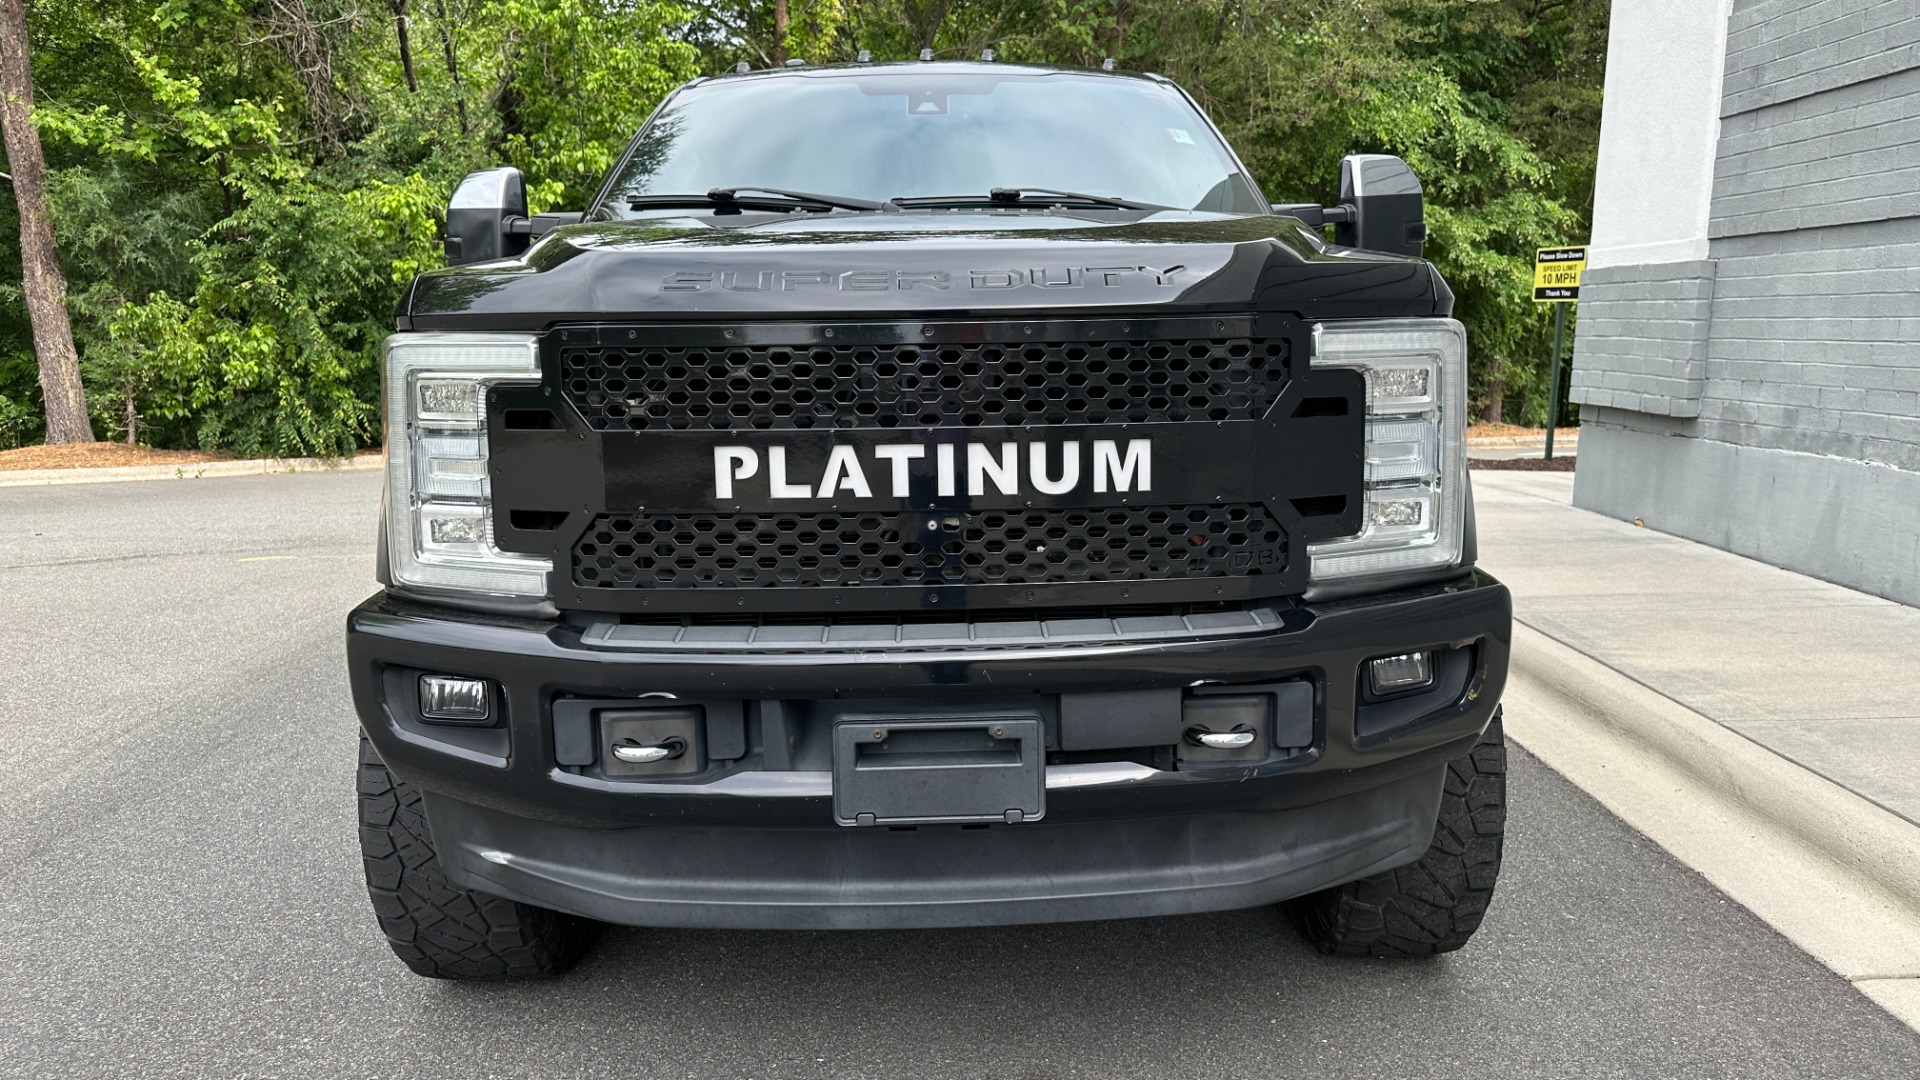 Used 2017 Ford Super Duty F-250 SRW PLATINUM / FABTECH LIFT / FUEL WHEELS / PANORAMIC ROOF / ROCK LIGHTS for sale $62,995 at Formula Imports in Charlotte NC 28227 8